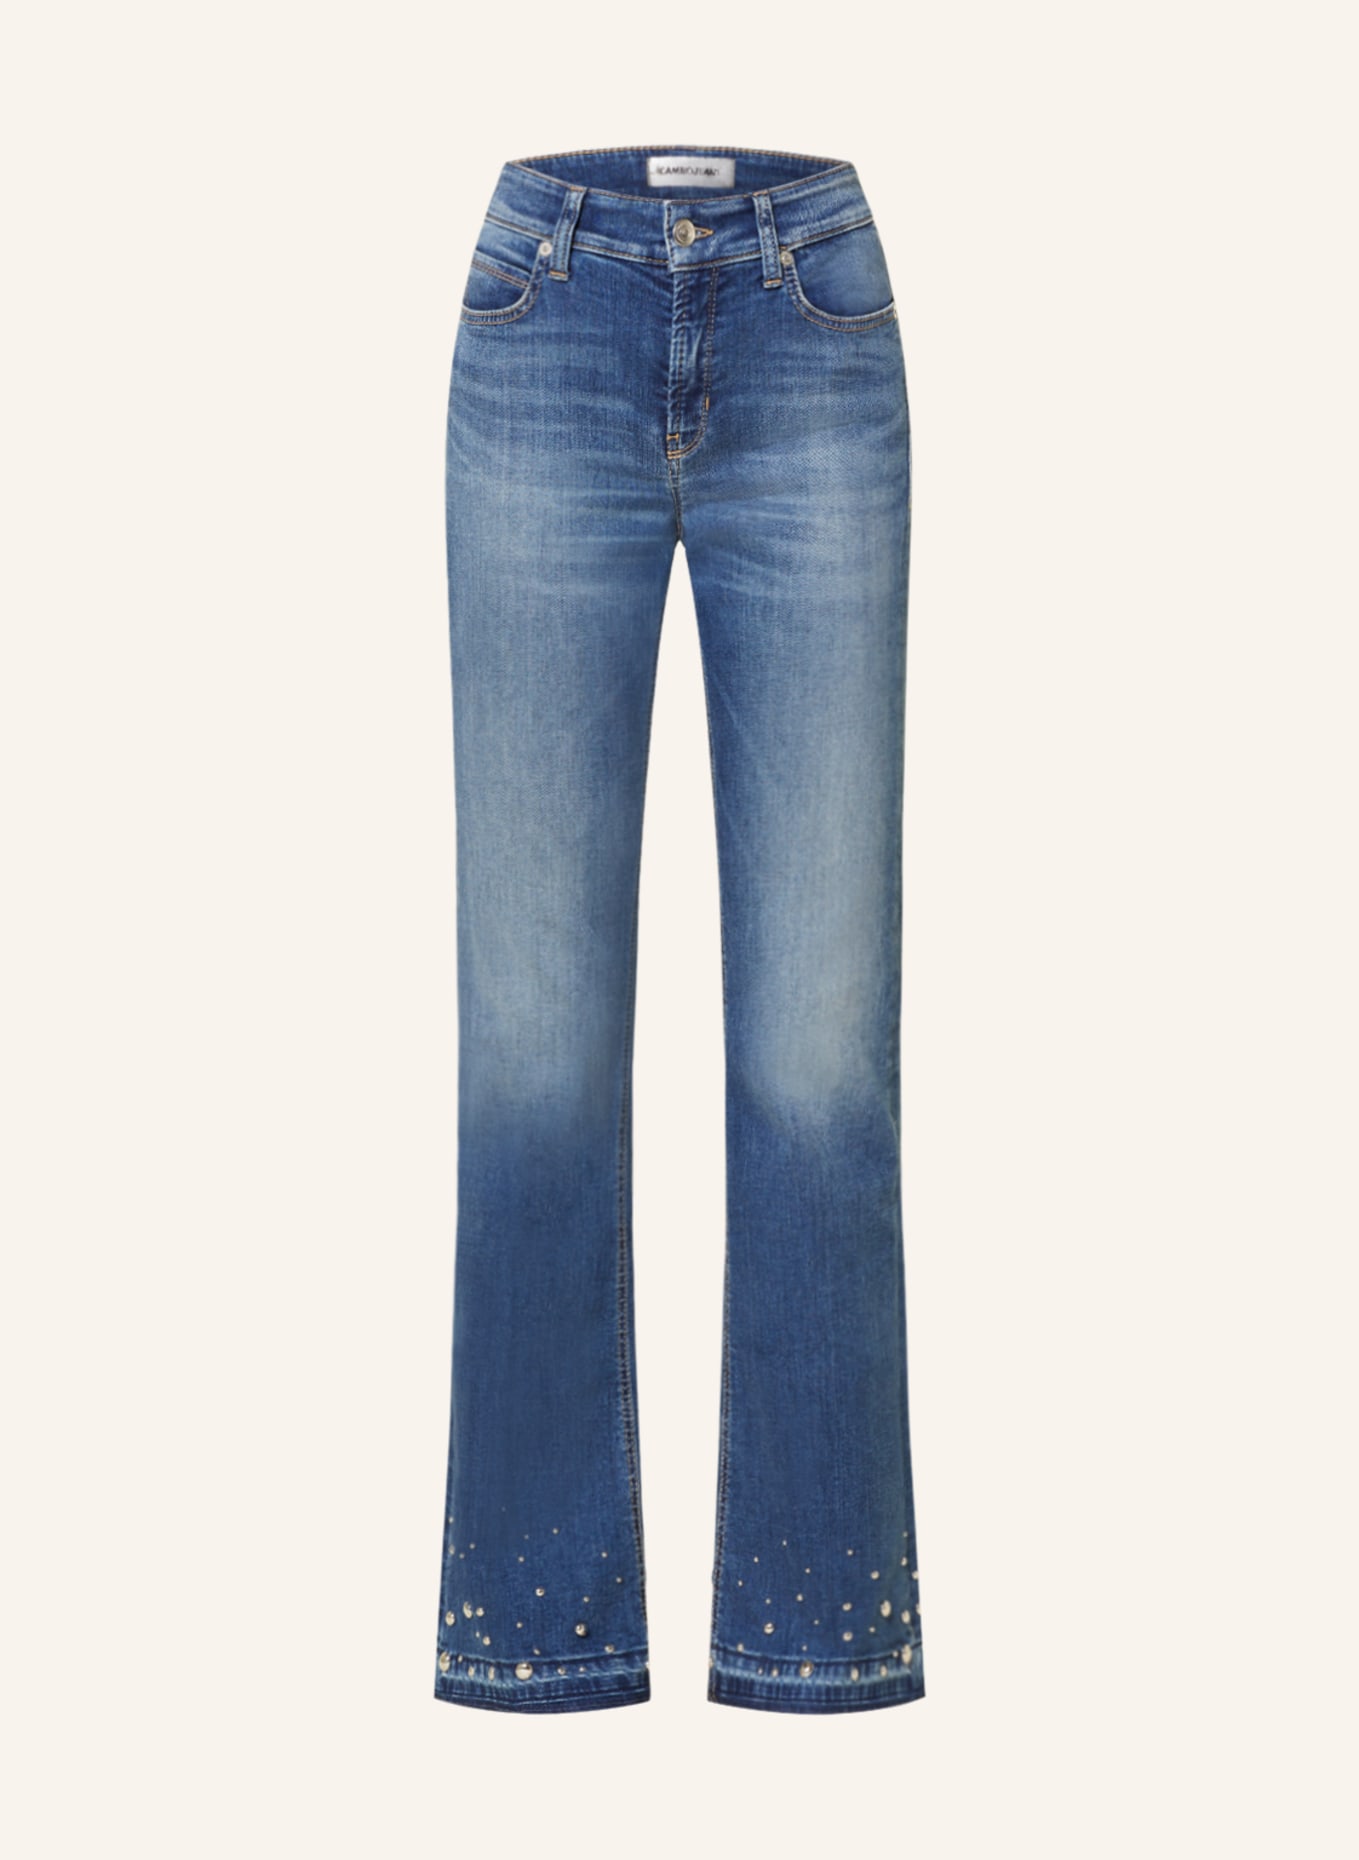 CAMBIO Flared jeans PARIS with rivets, Color: 5138 mid used contrast open he (Image 1)